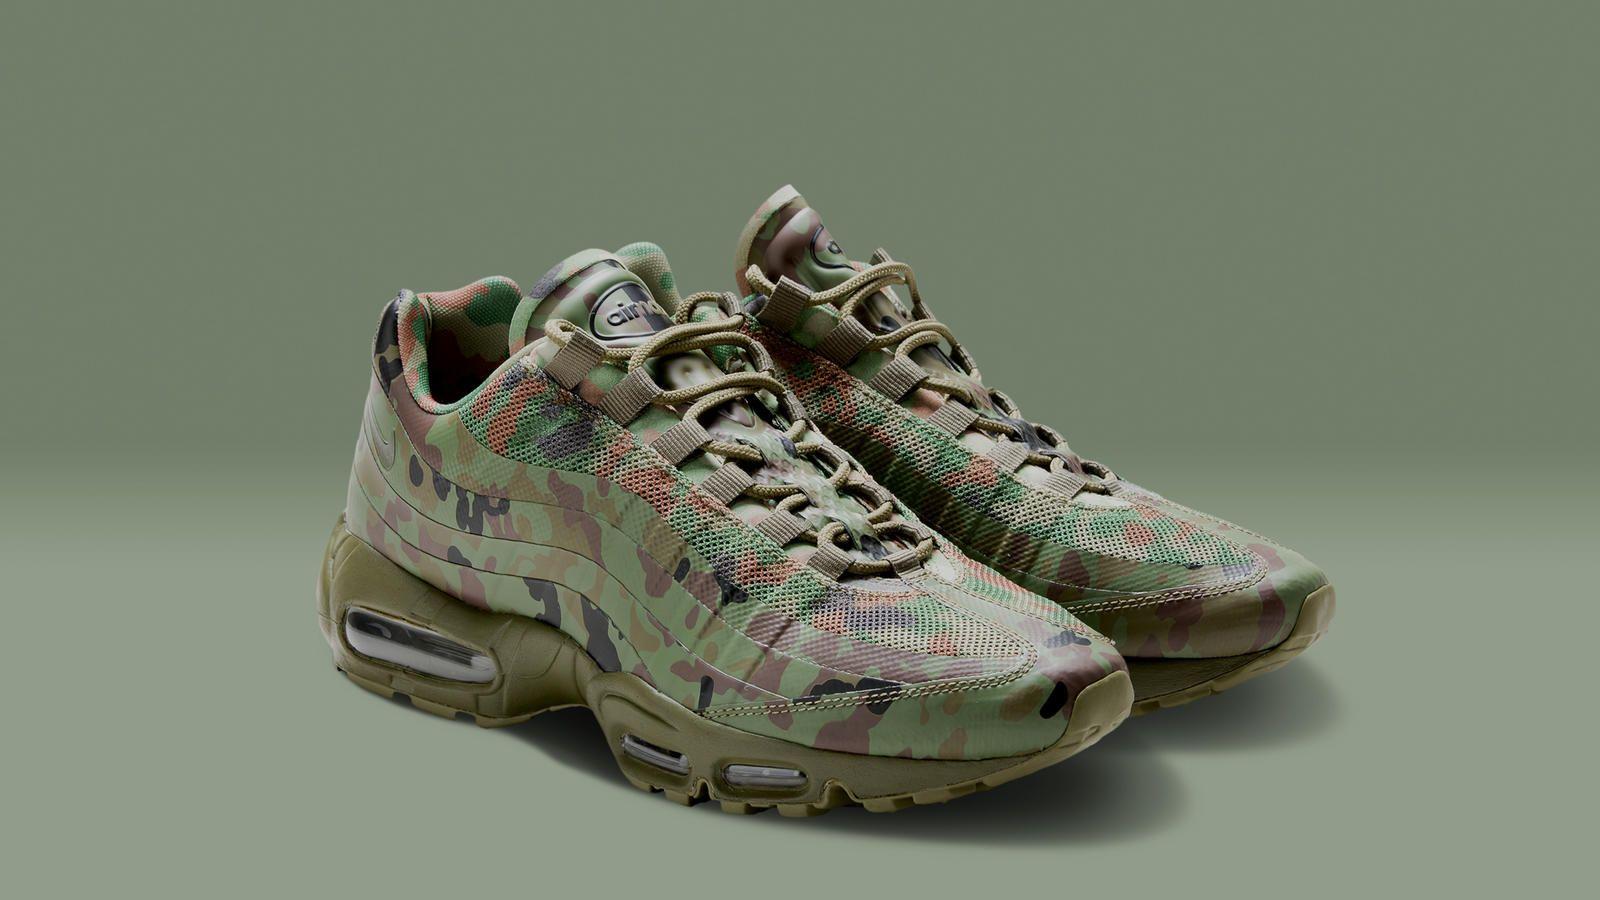 Camouflage Nike Logo - Revealed: the Nike Air Max Camo Collection - Nike News